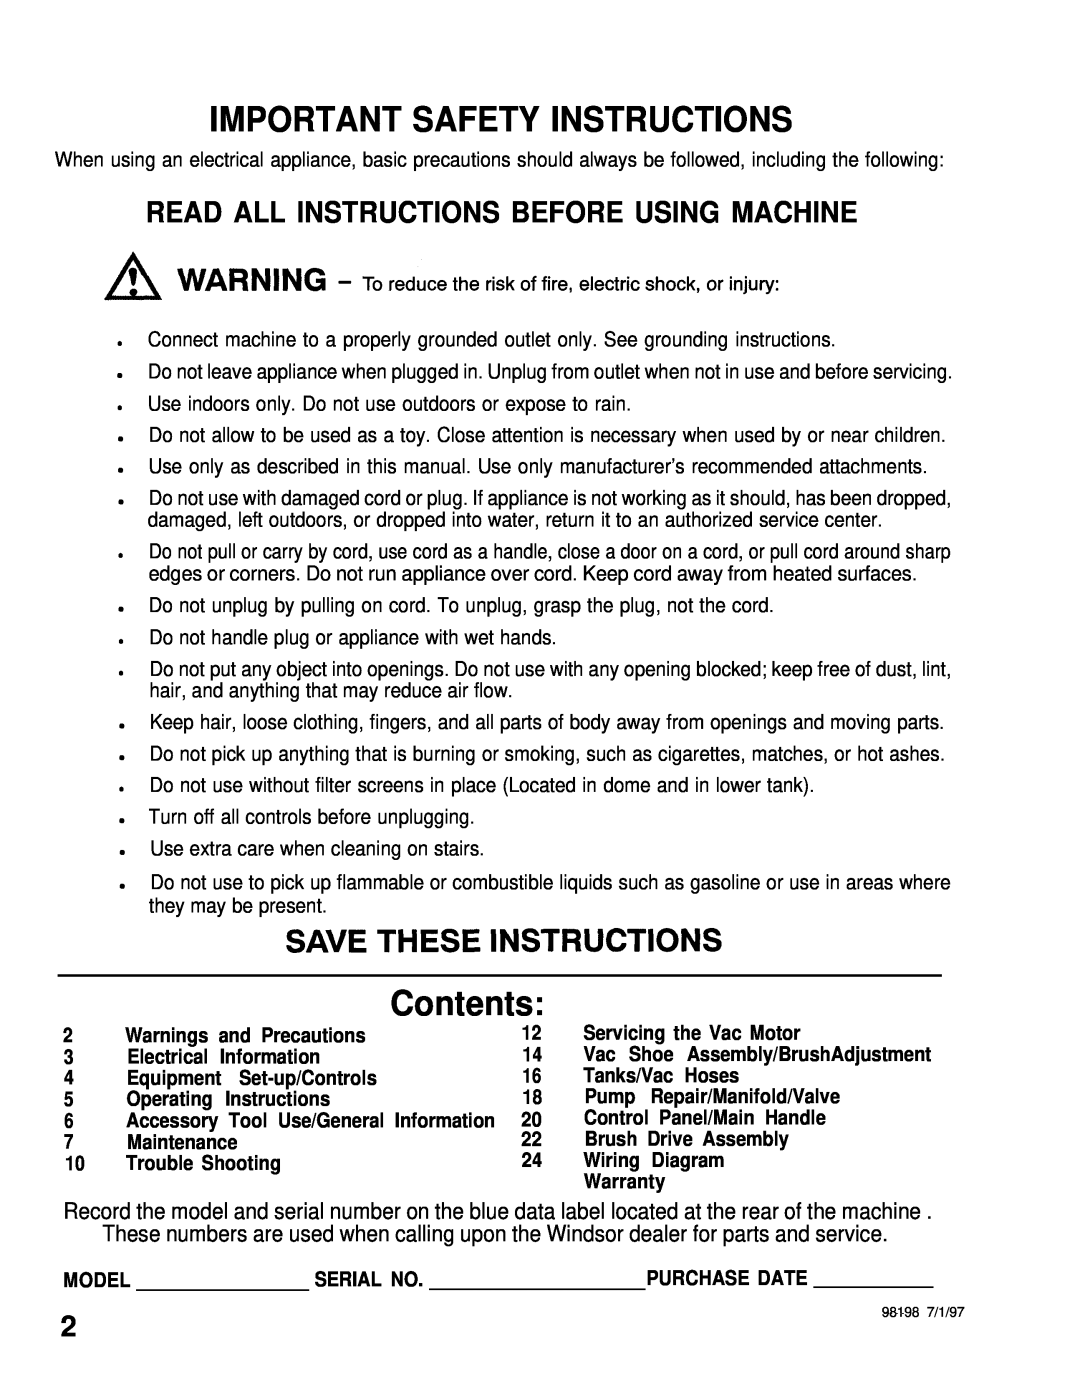 Windsor ADP Read All Instructions Before Using Machine, Important Safety Instructions, Contents, Save These Instructions 